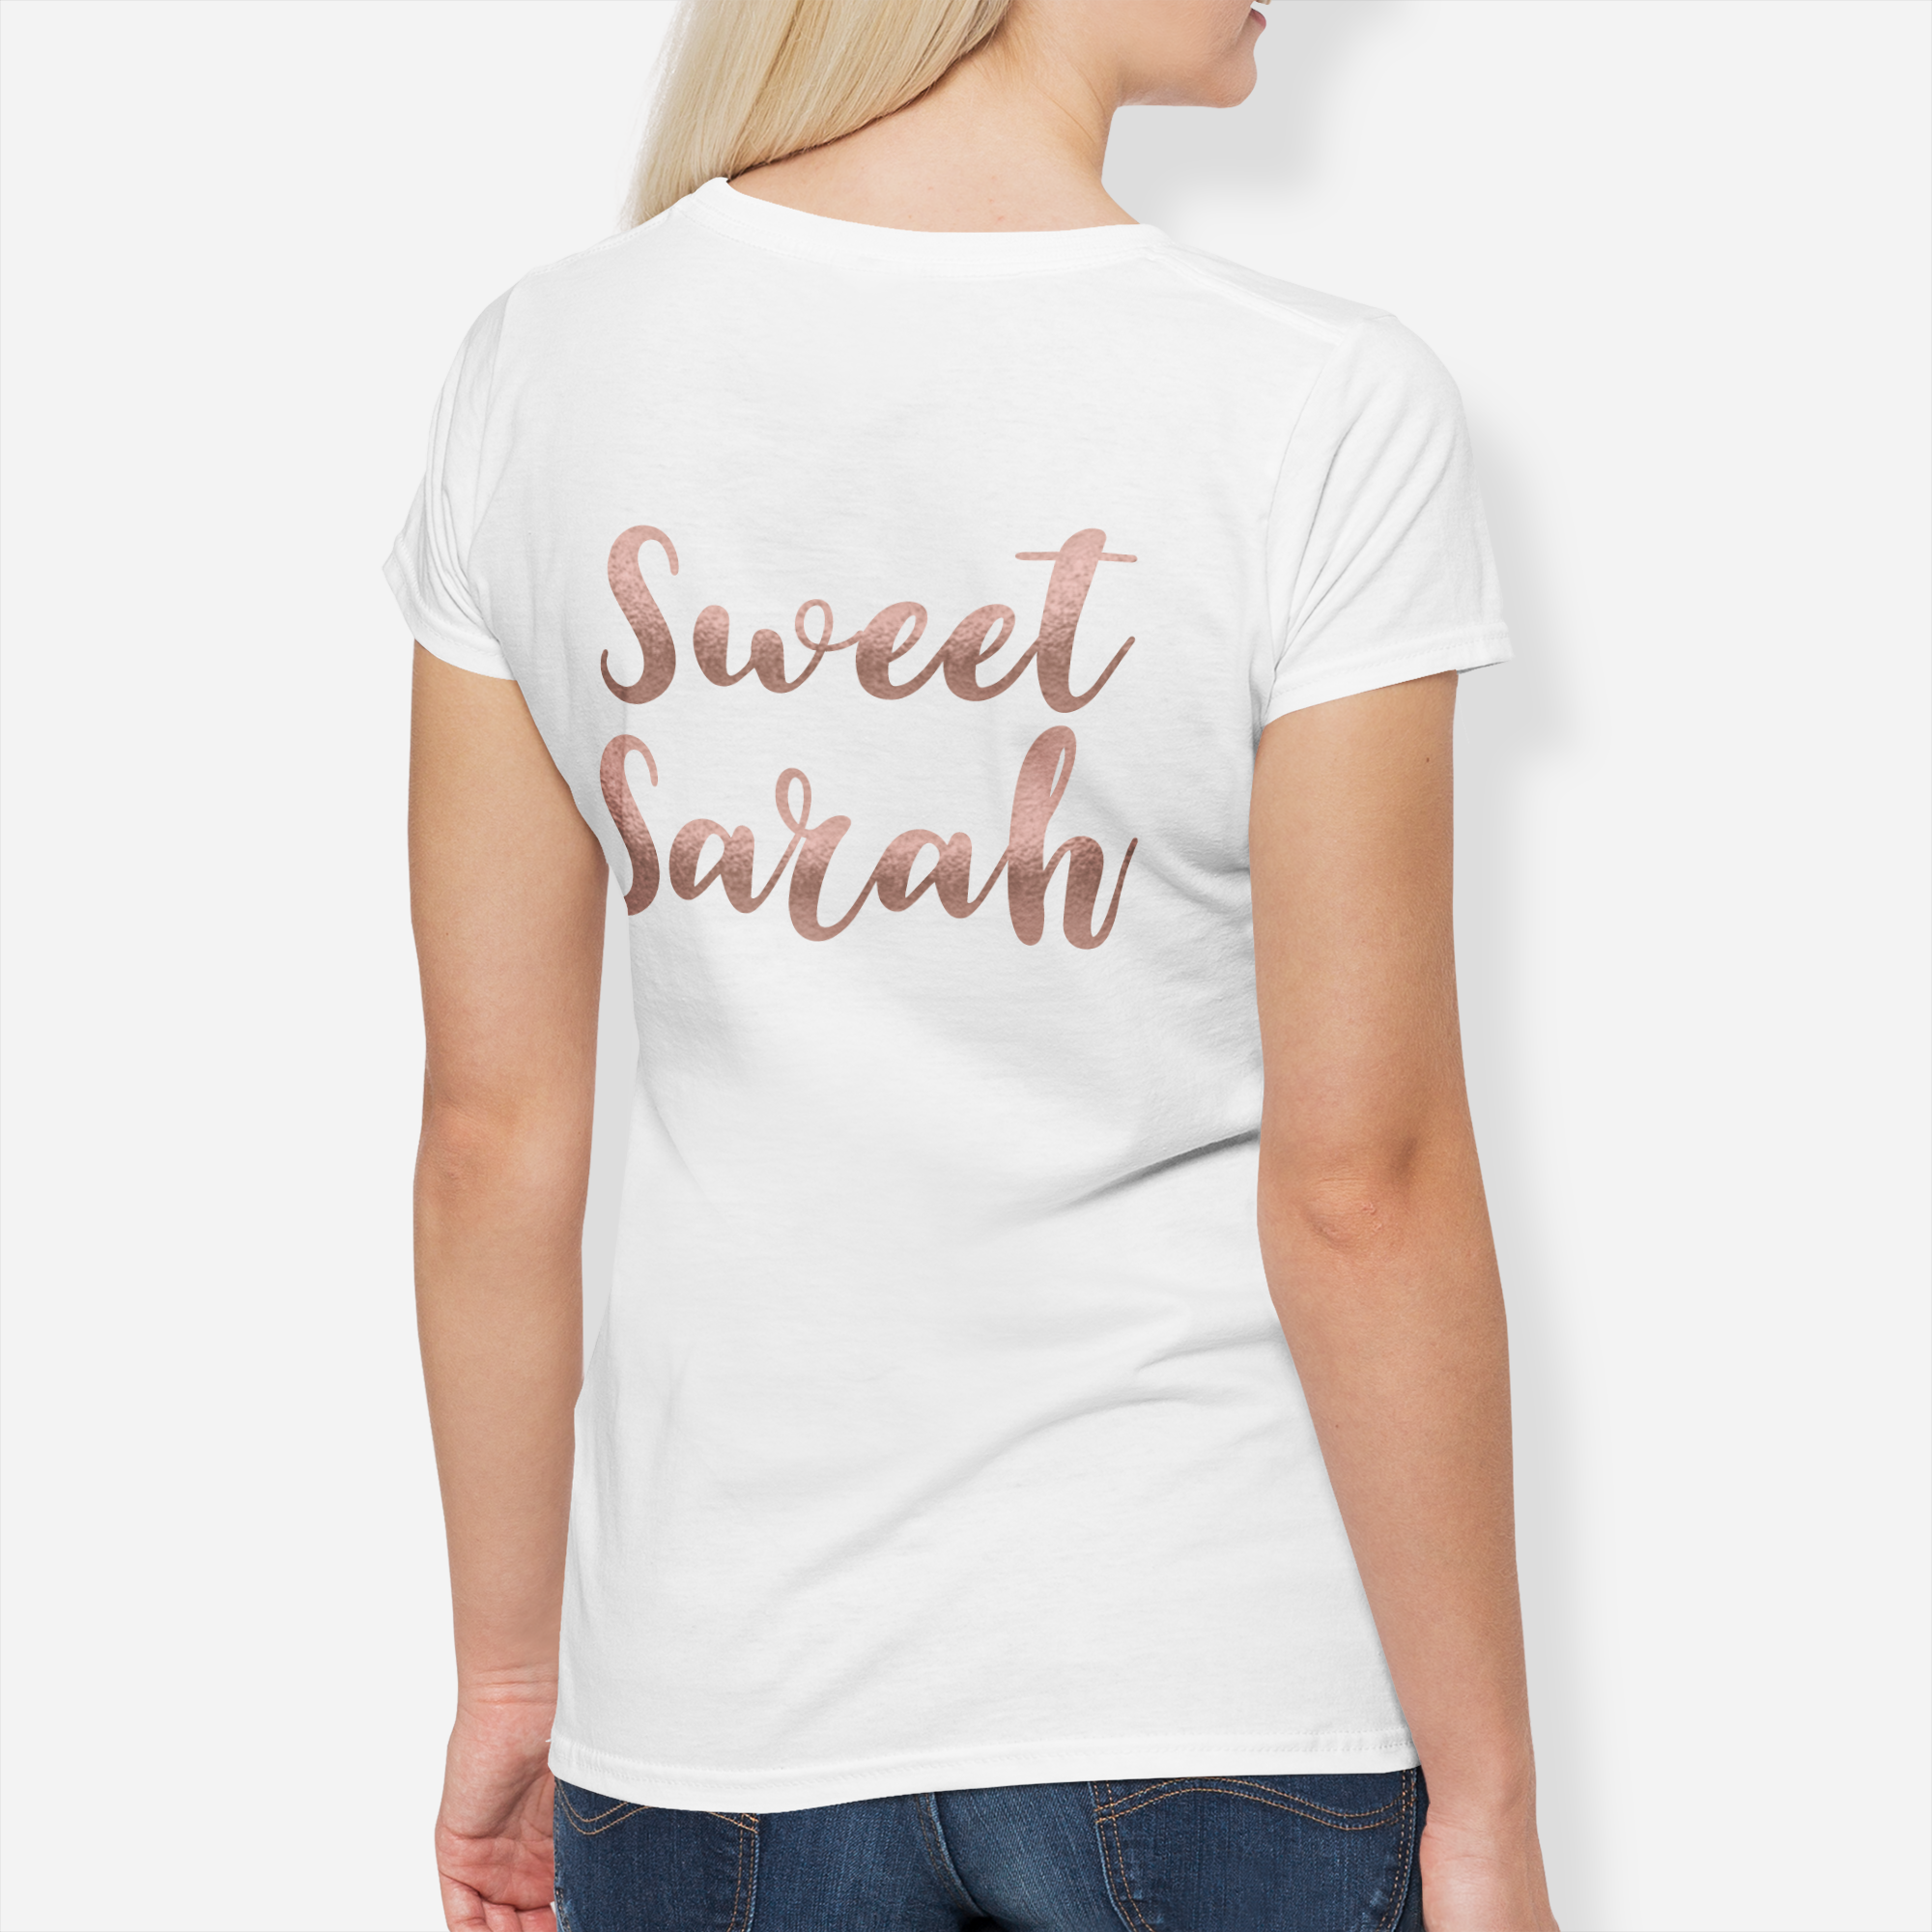 Bride Tribe Personalised Rose Gold Hen Party T-Shirt